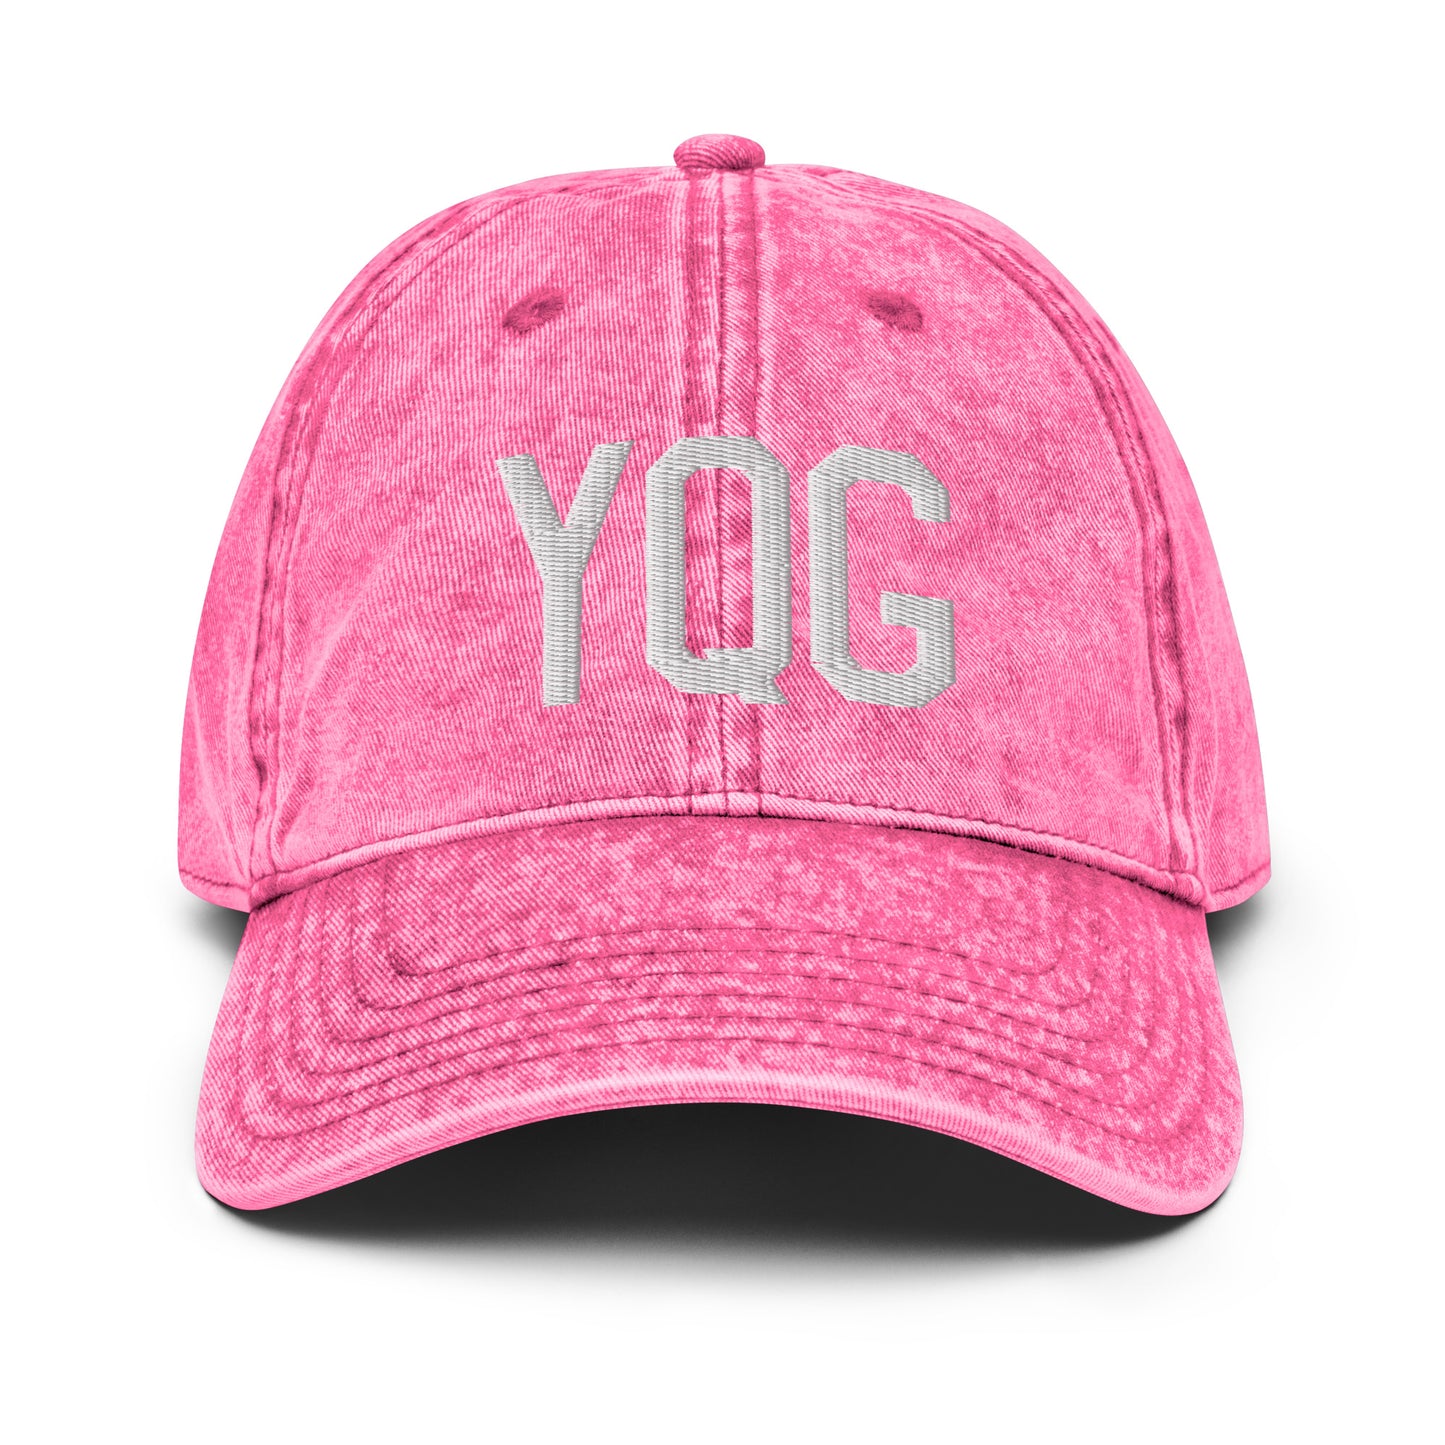 Airport Code Twill Cap - White • YQG Windsor • YHM Designs - Image 25